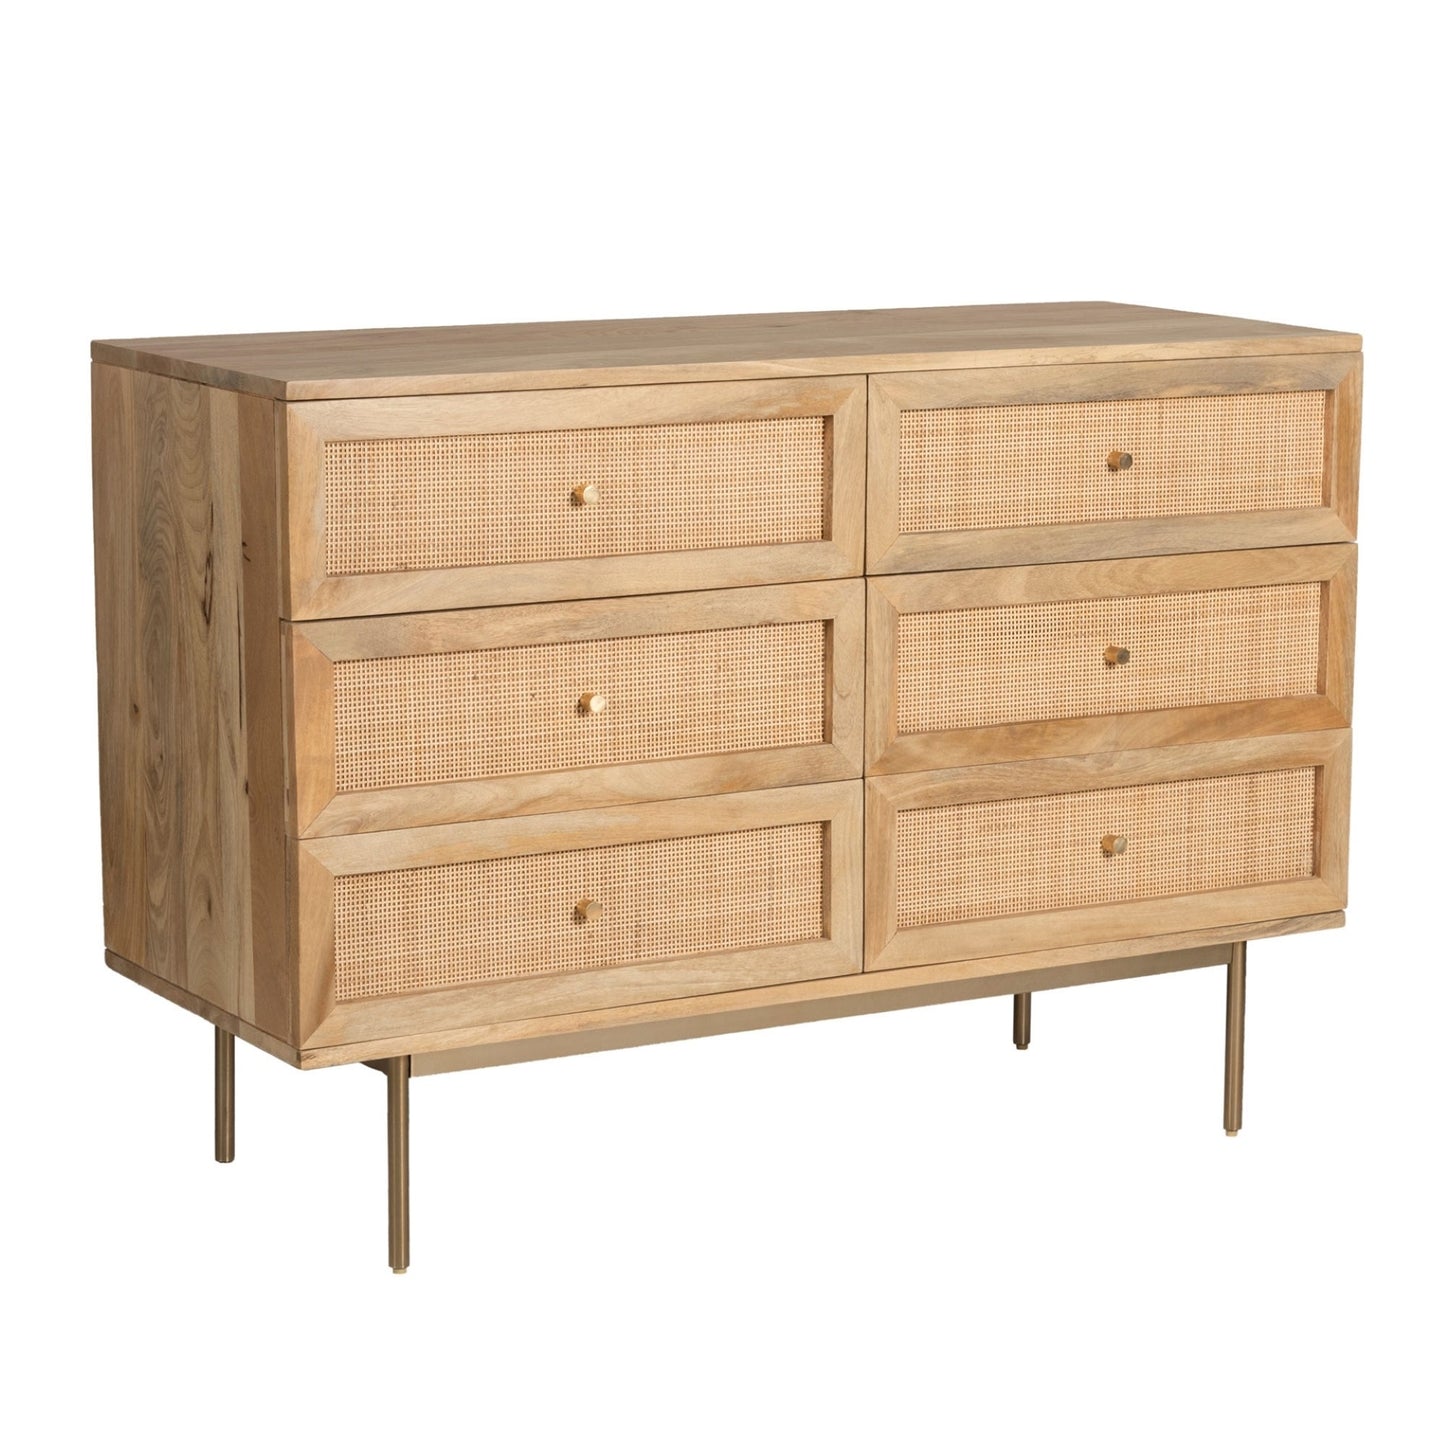 20% off, SP0110O, Raphia Wide Chest Of Drawers, 6 Drawers,